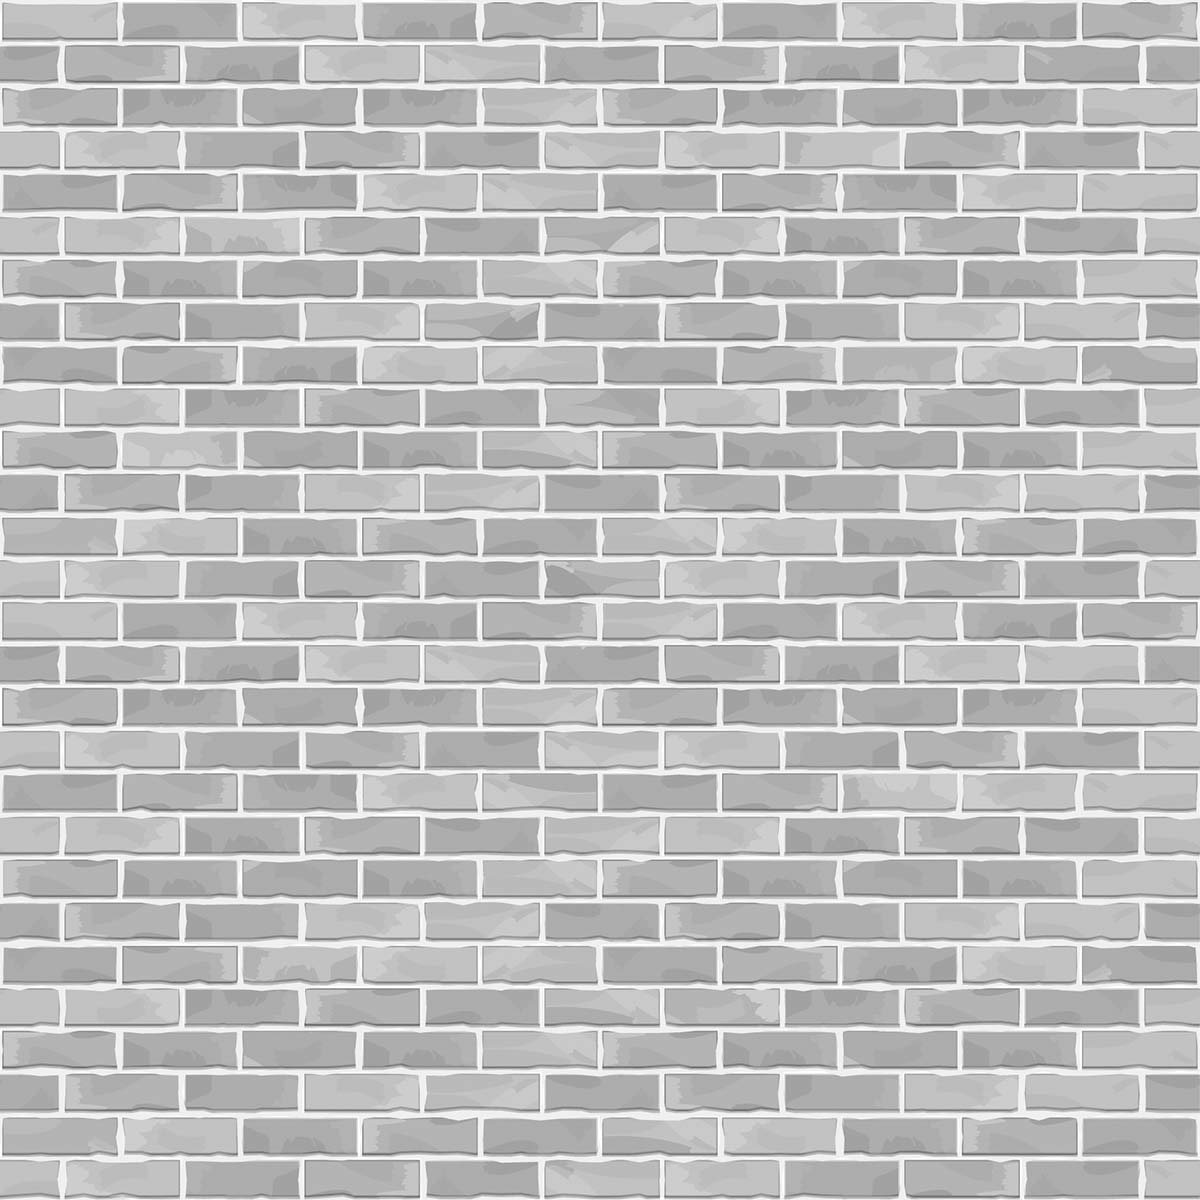 A white brick wall with white lines